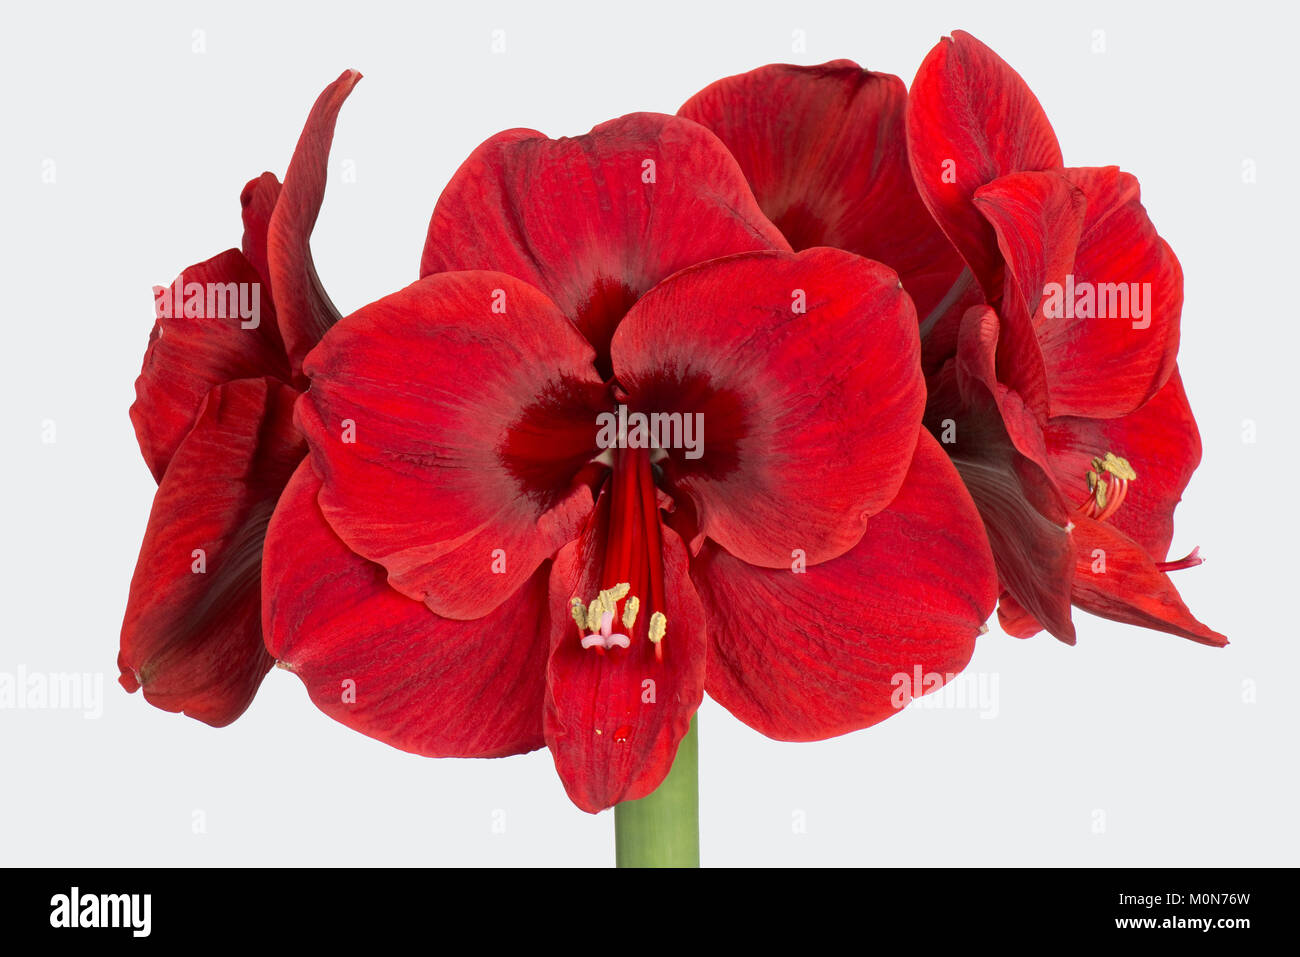 Deep red flowers from large bulb of Amaryllis, Hippeastrum spp, at Christmas Stock Photo